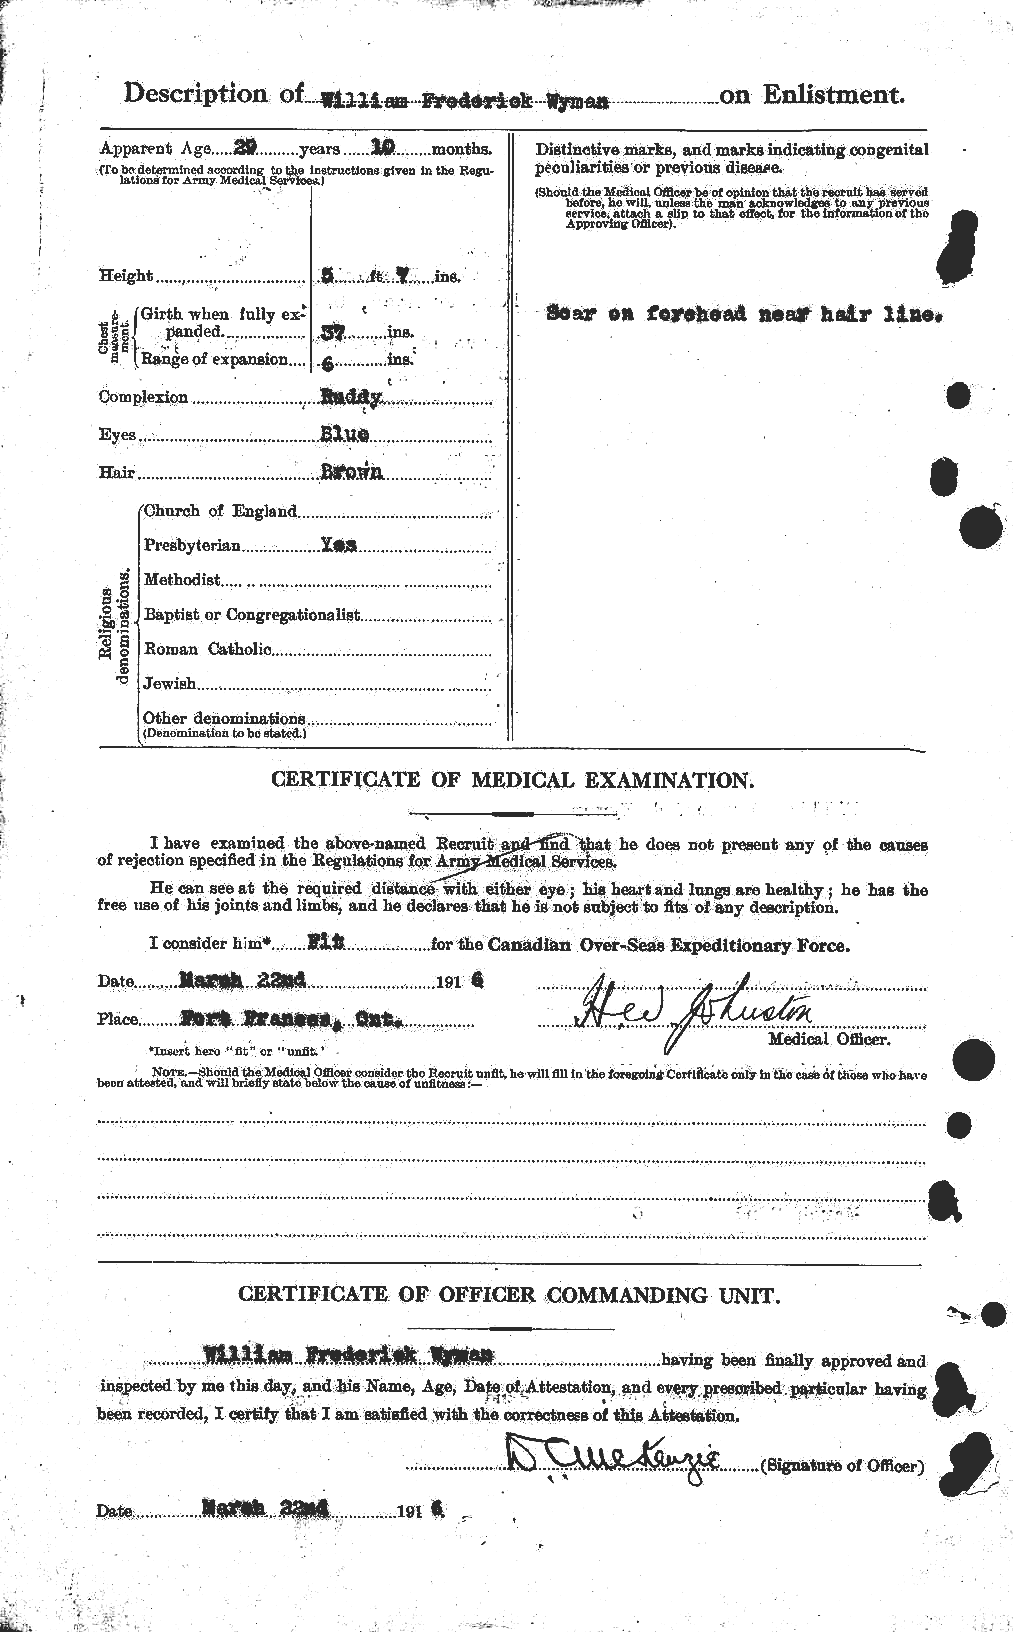 Personnel Records of the First World War - CEF 686862b